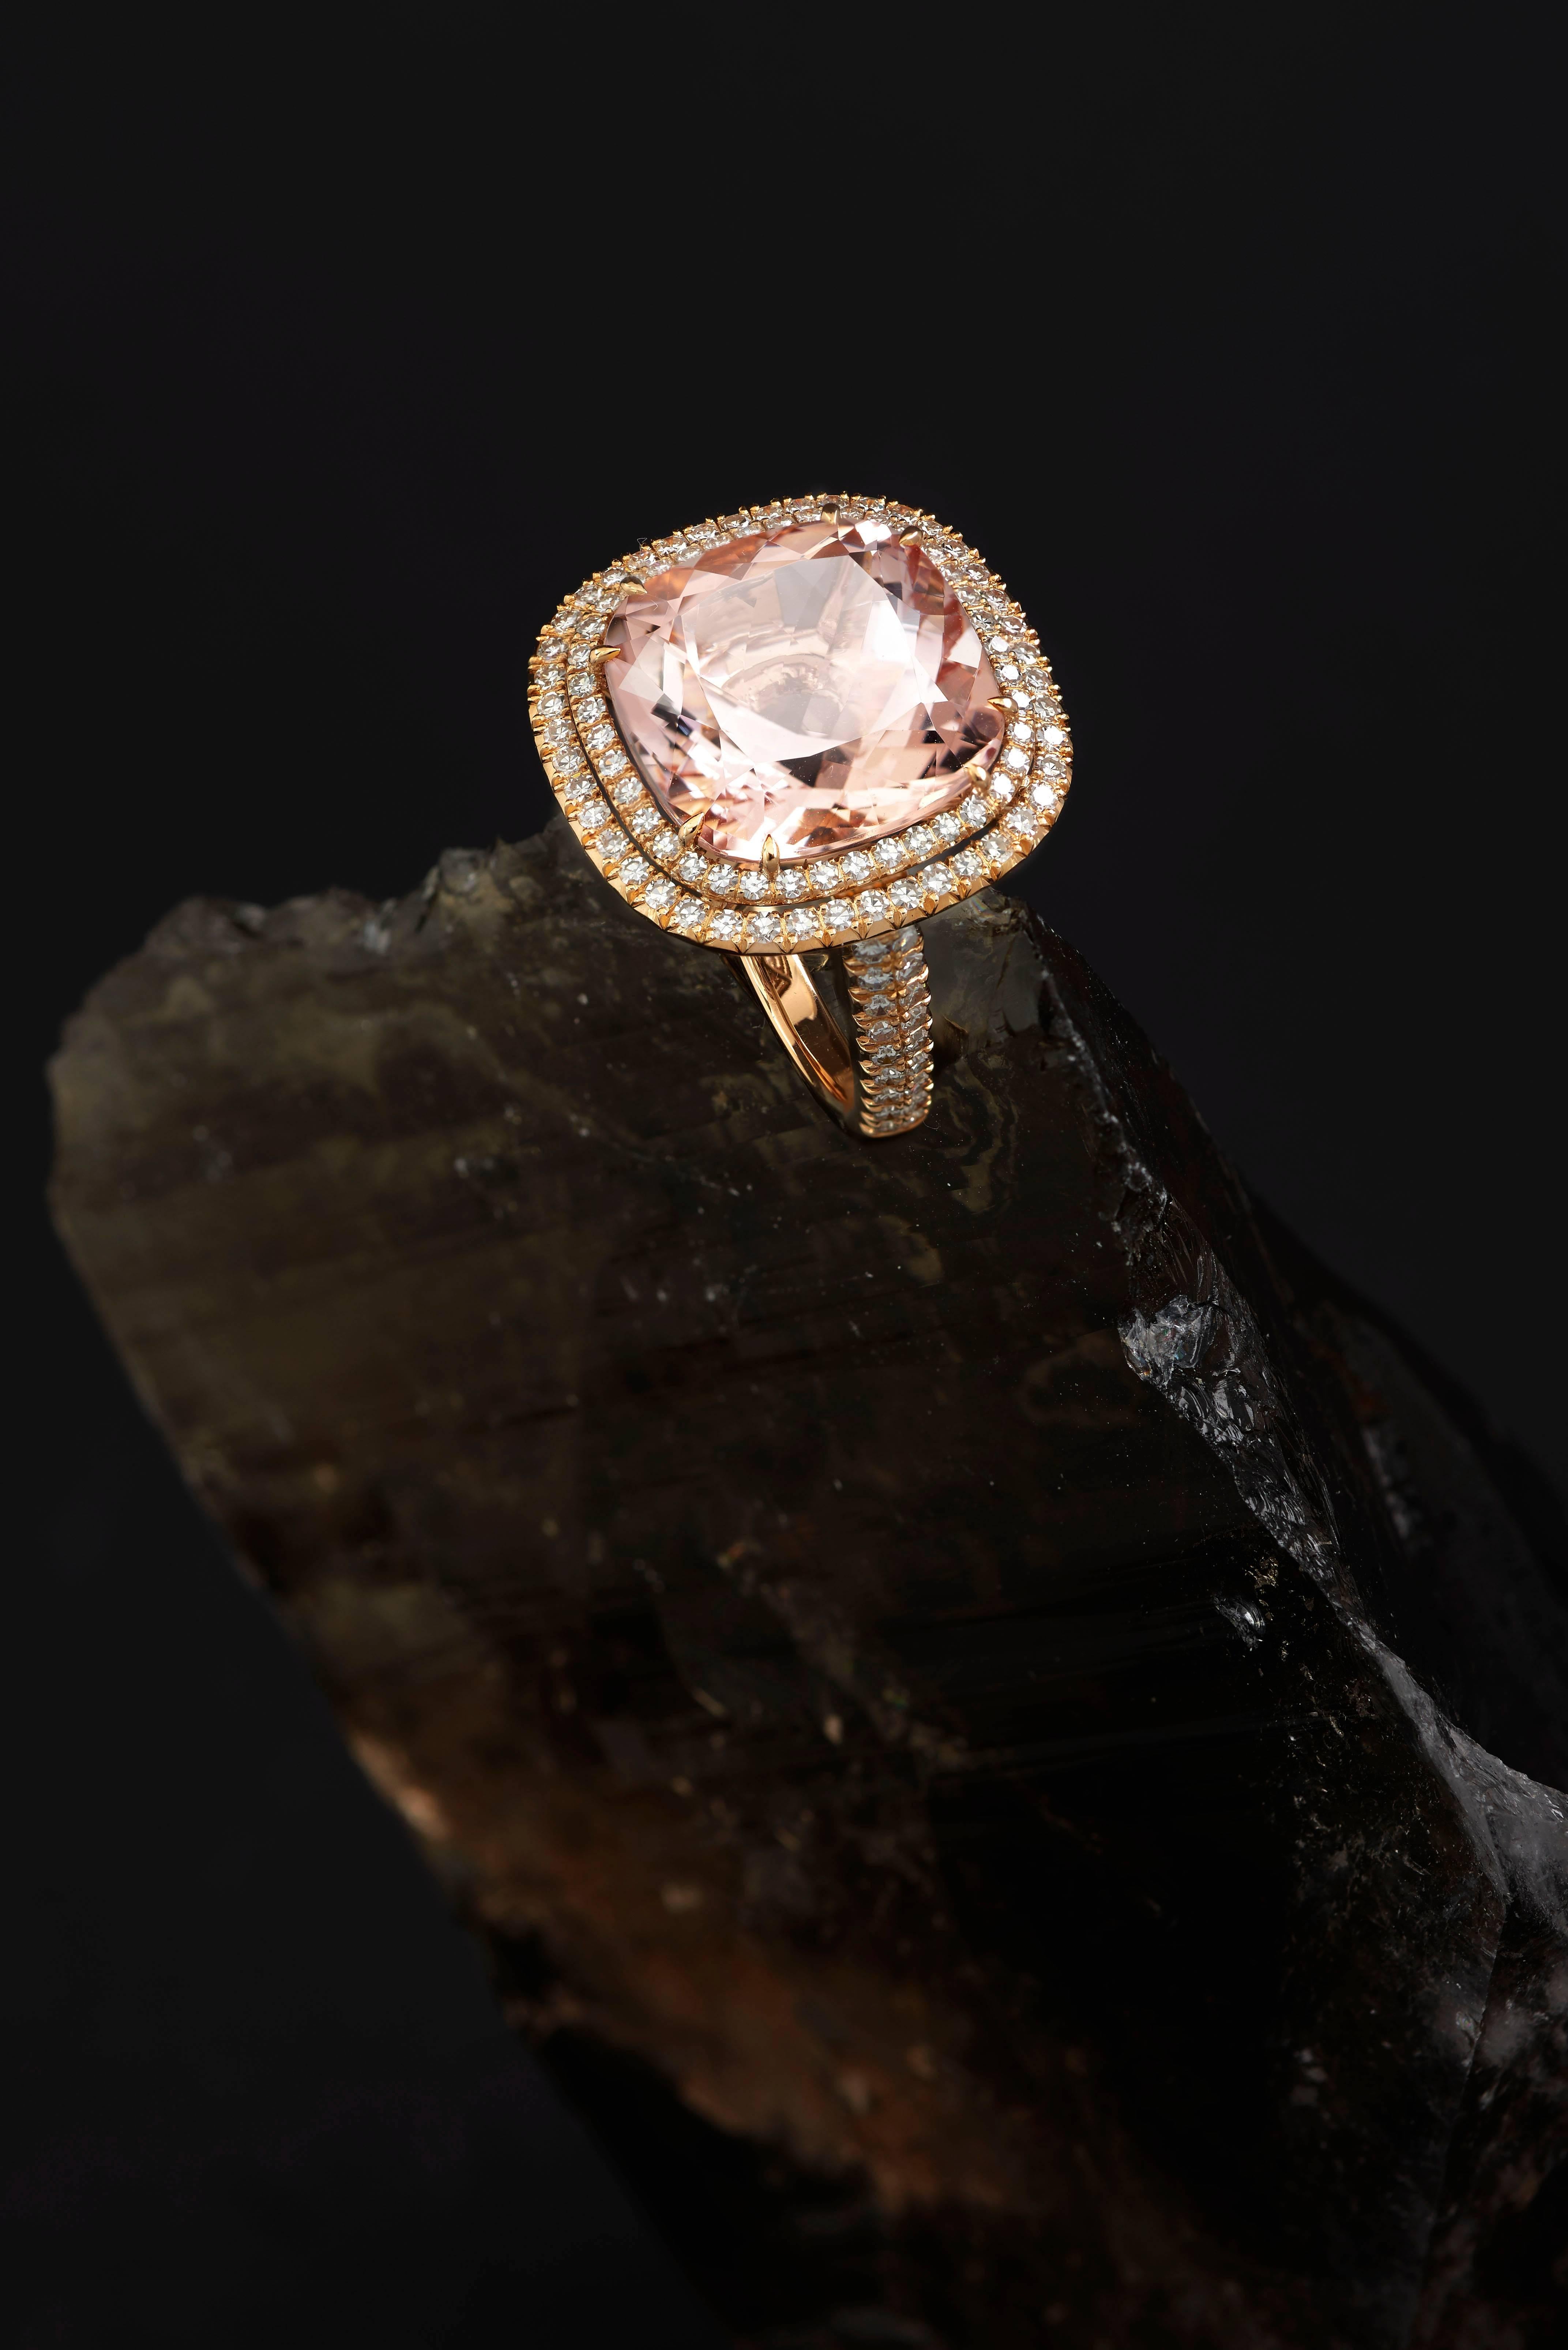 This one-off ring is handmade in Switzerland with a cushion cut Morganite of 17.71 ct. in entourage of 140 Diamonds of total 1.10 ct. F vvs. It is made with 18K rose gold (4N).
You can expect the best Swiss workmanship and quality.
ring size 53 with